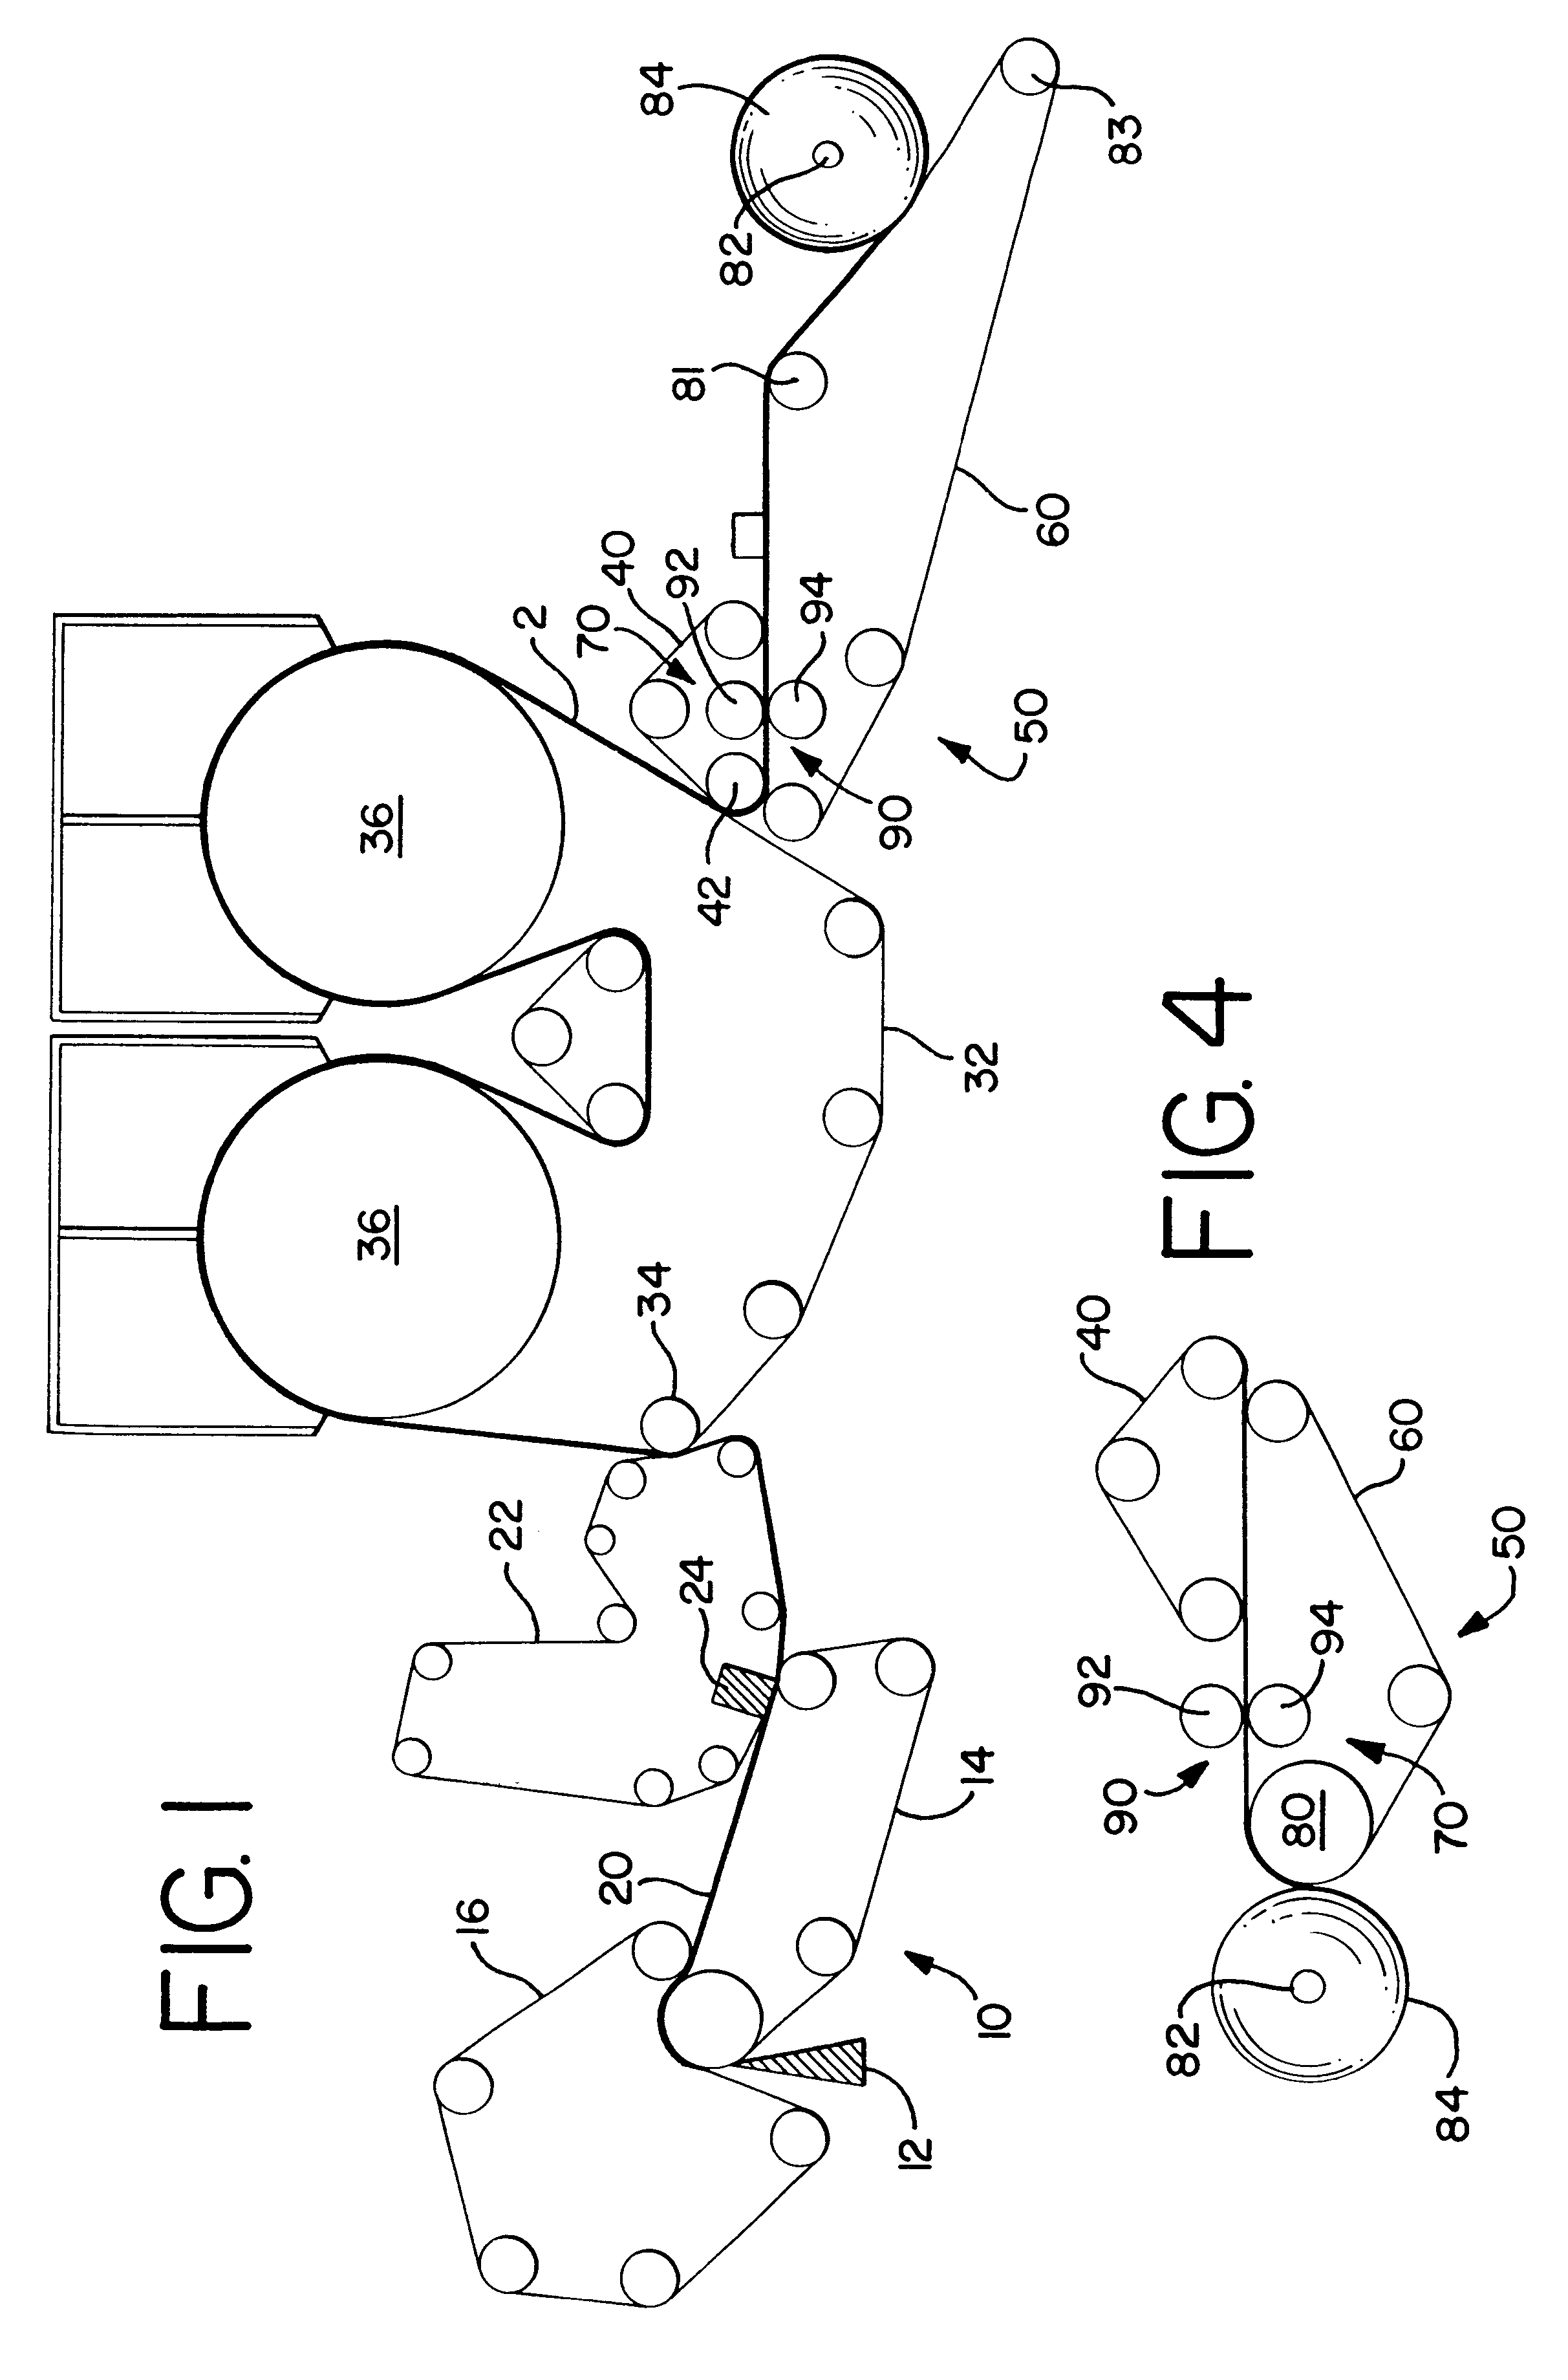 Apparatus for calendering a sheet material web carried by a fabric